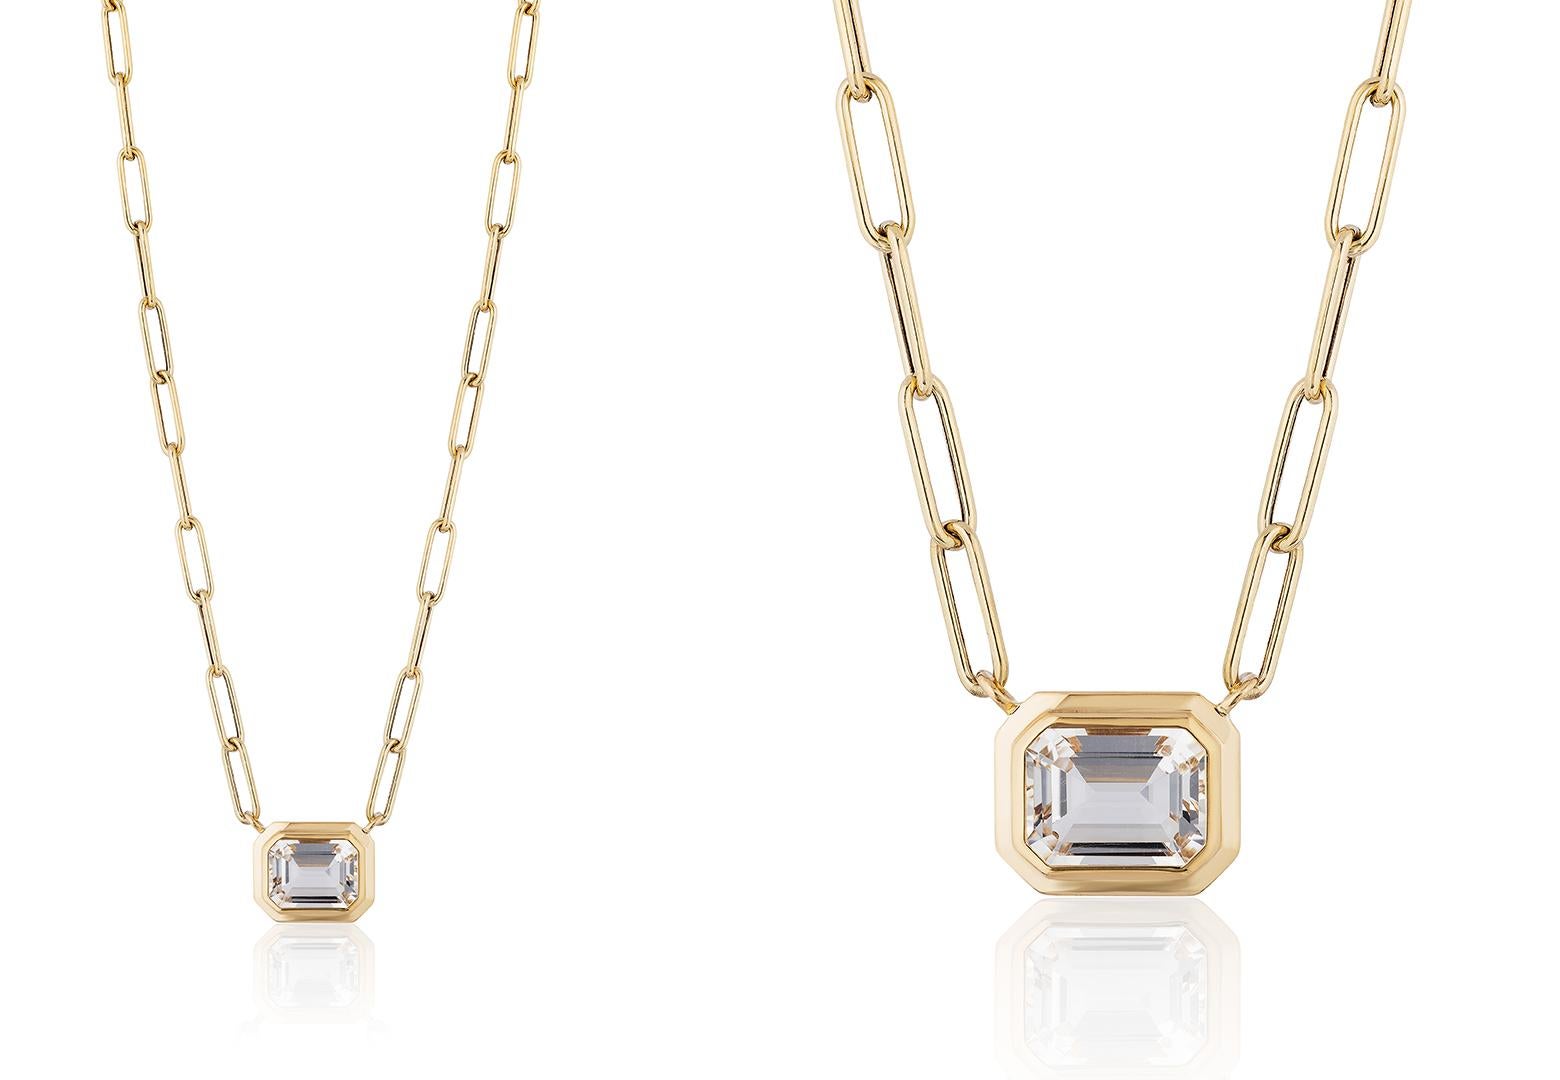 This beautiful East-West Rock Crystal Emerald Cut Bezel Set Pendant in 18K Yellow Gold is from our ‘Manhattan’ Collection. Minimalist lines yet bold structures are what our Manhattan Collection is all about. Our pieces represent the famous skyline